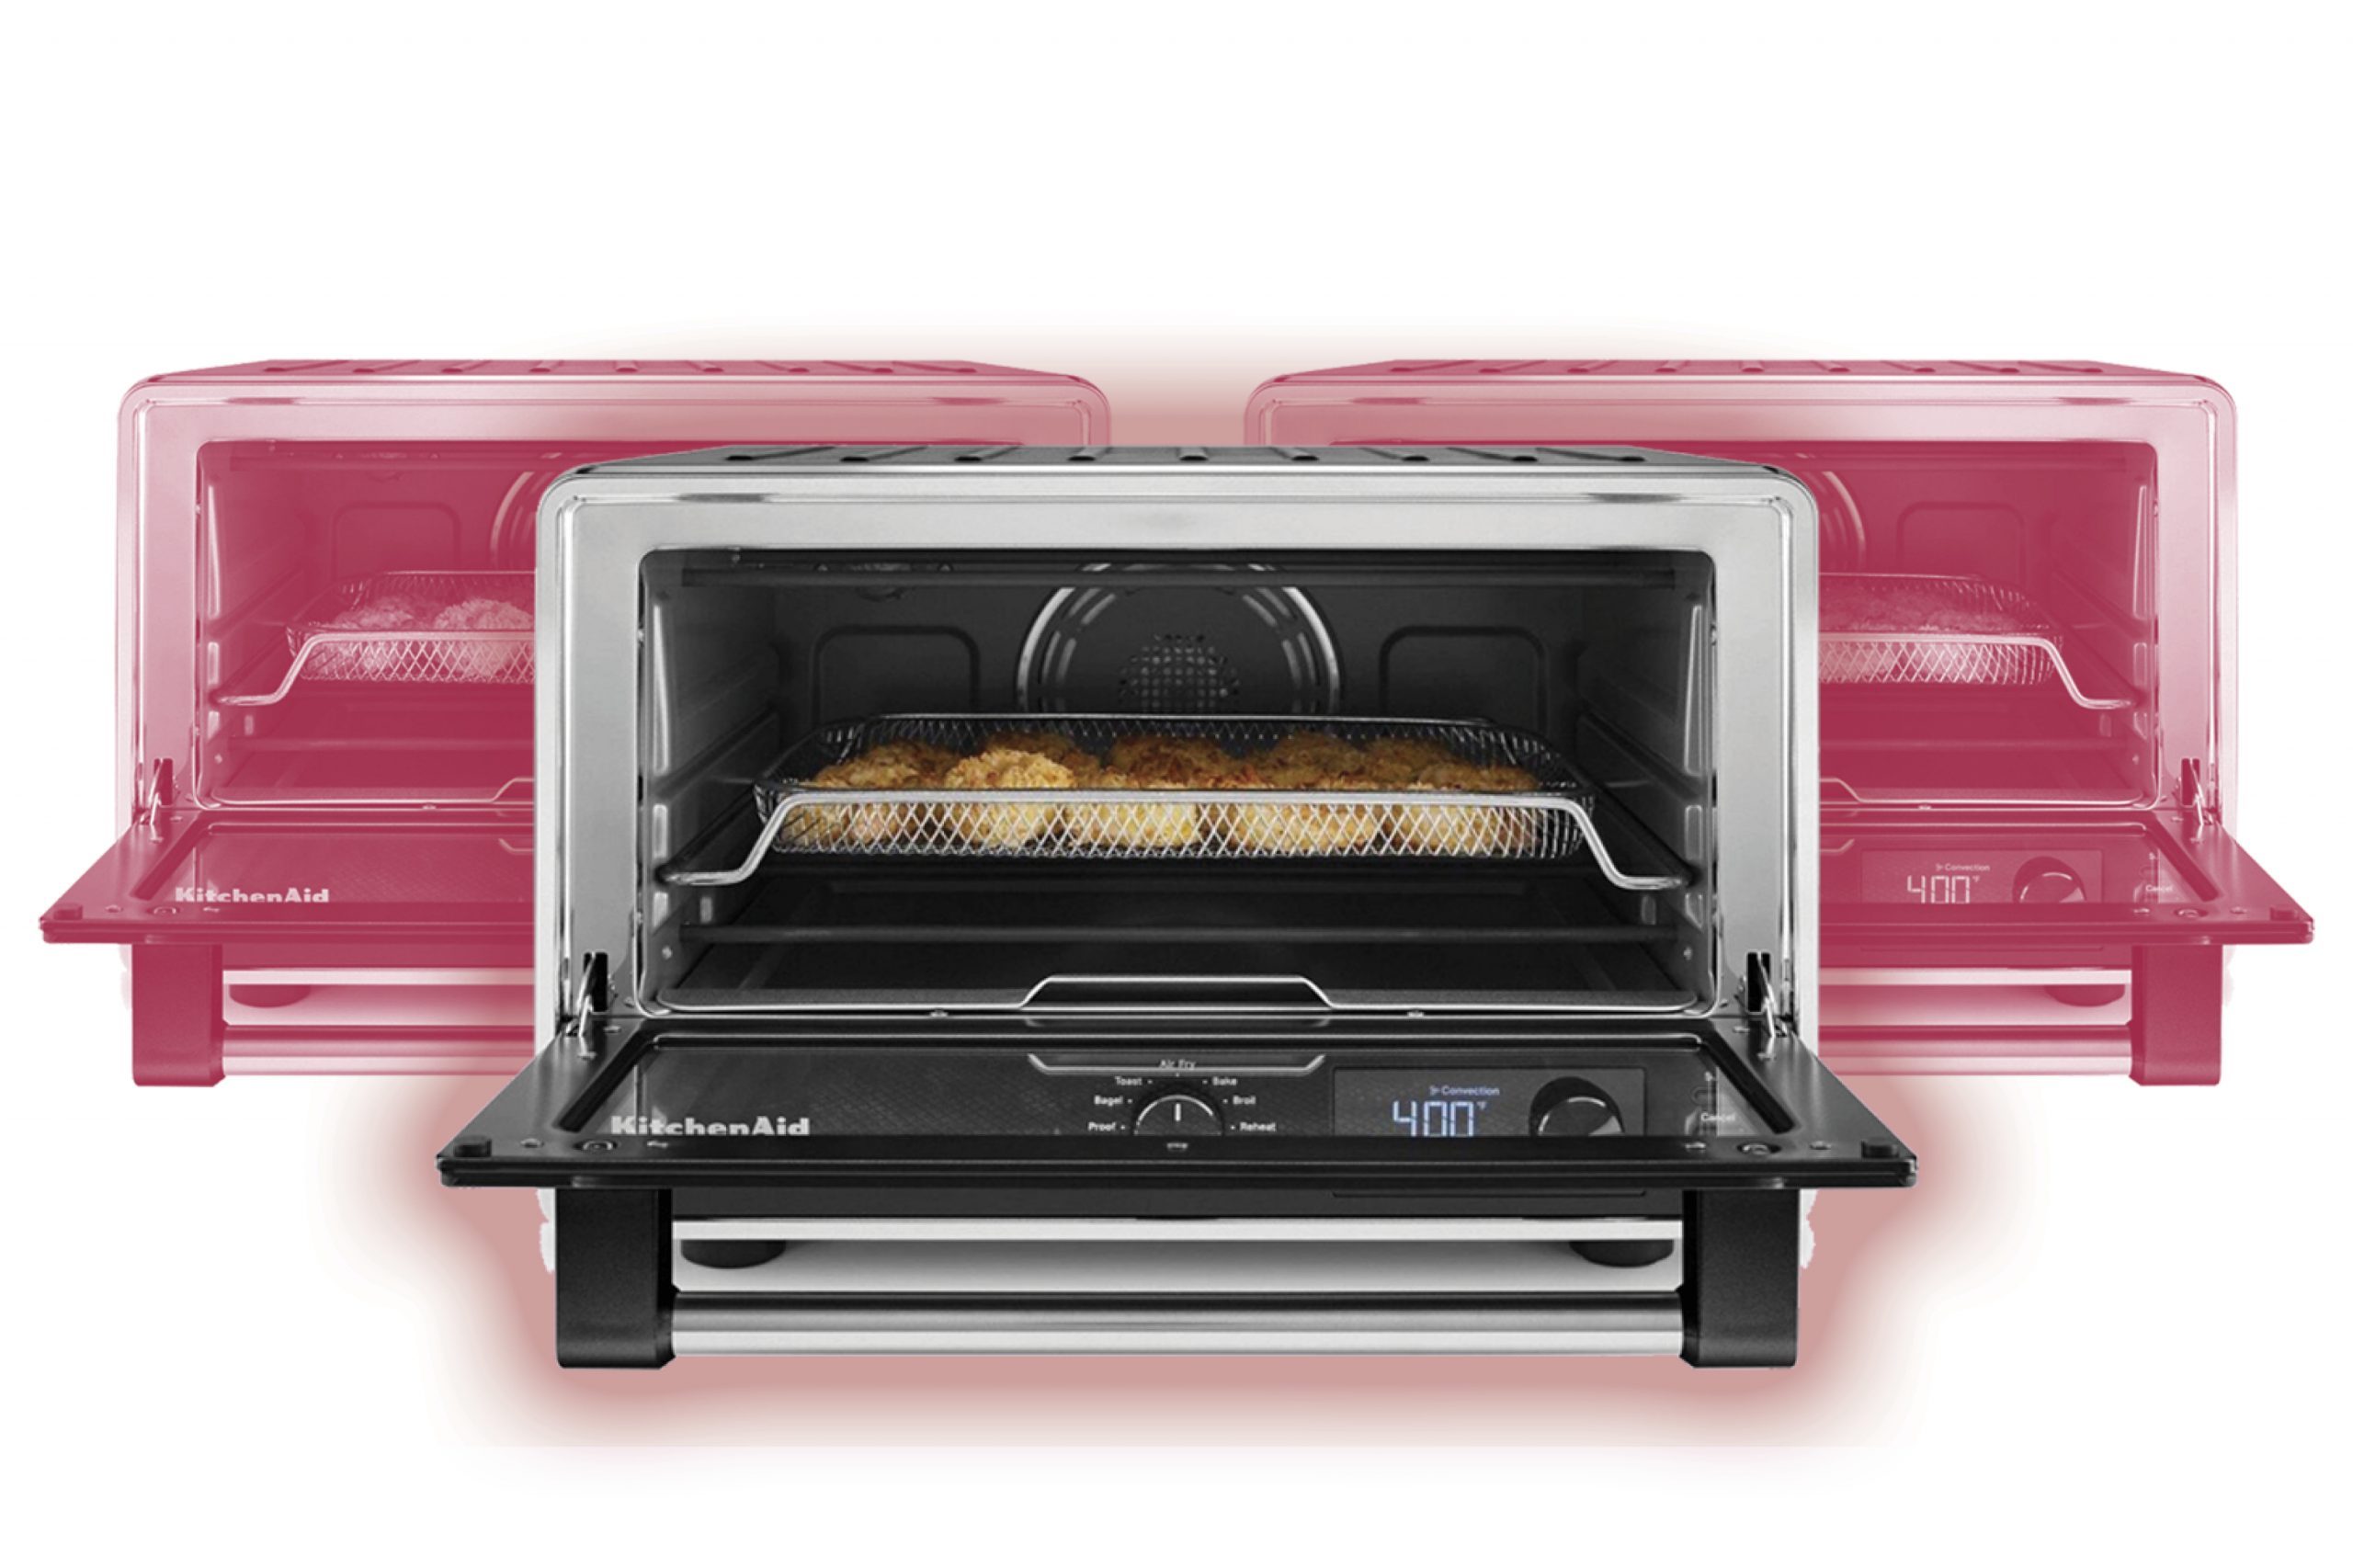 5 Best Microwave Toaster Oven Combo Review 2019 Check out the blog at:   #ScopePrice  #PriceComparisonsite #Buy # # #ecommerce #electricoven  #TheKitchen